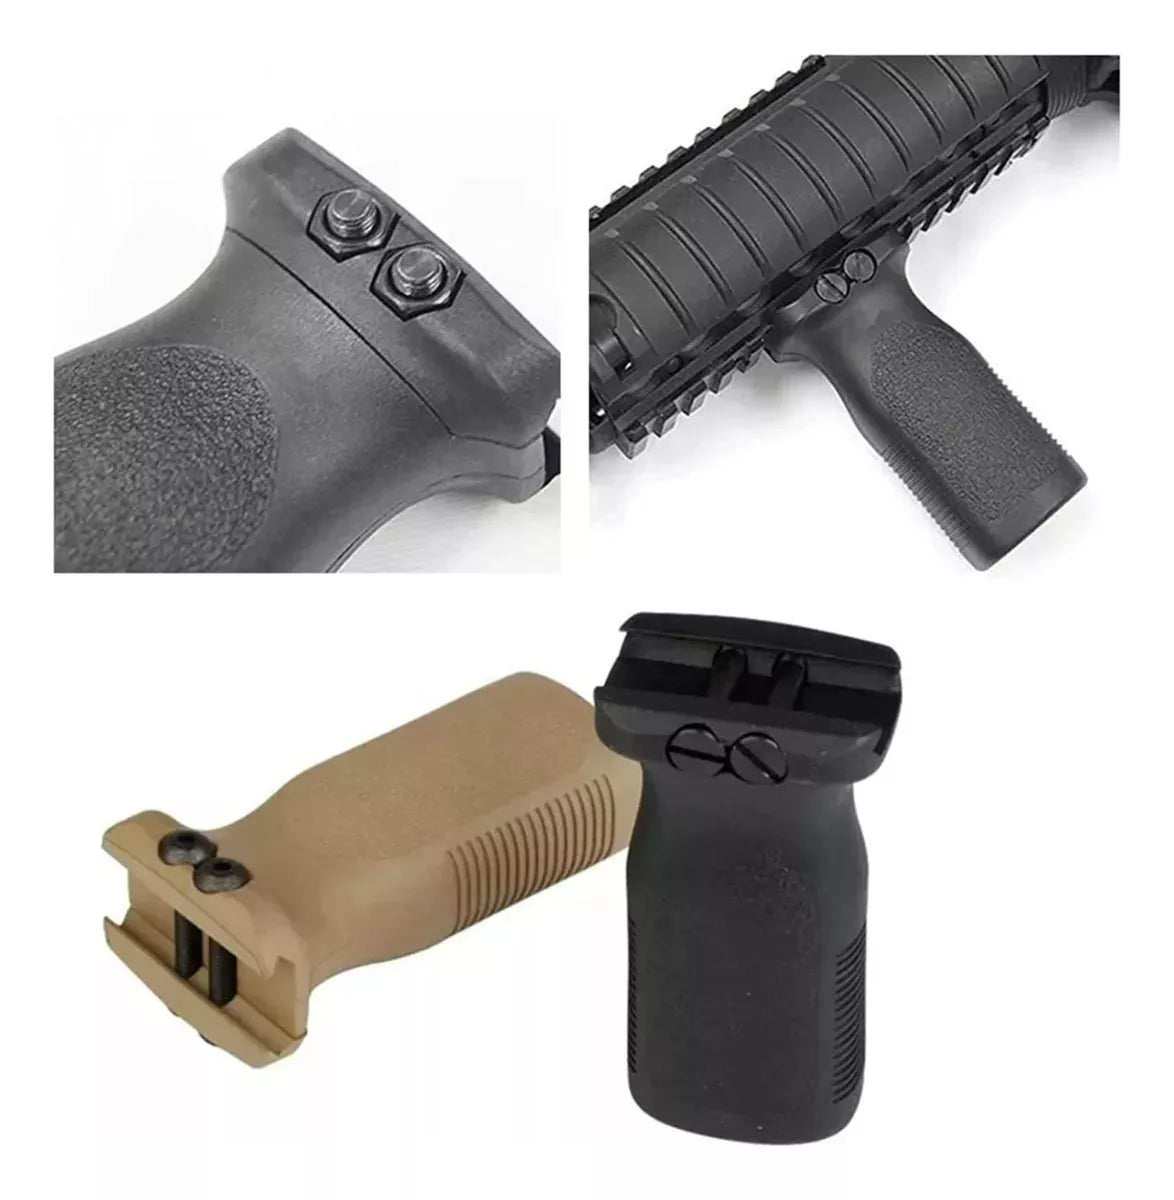 Grip Tactico Fusiles Airsoft Replica Grip Airsoft Paintball